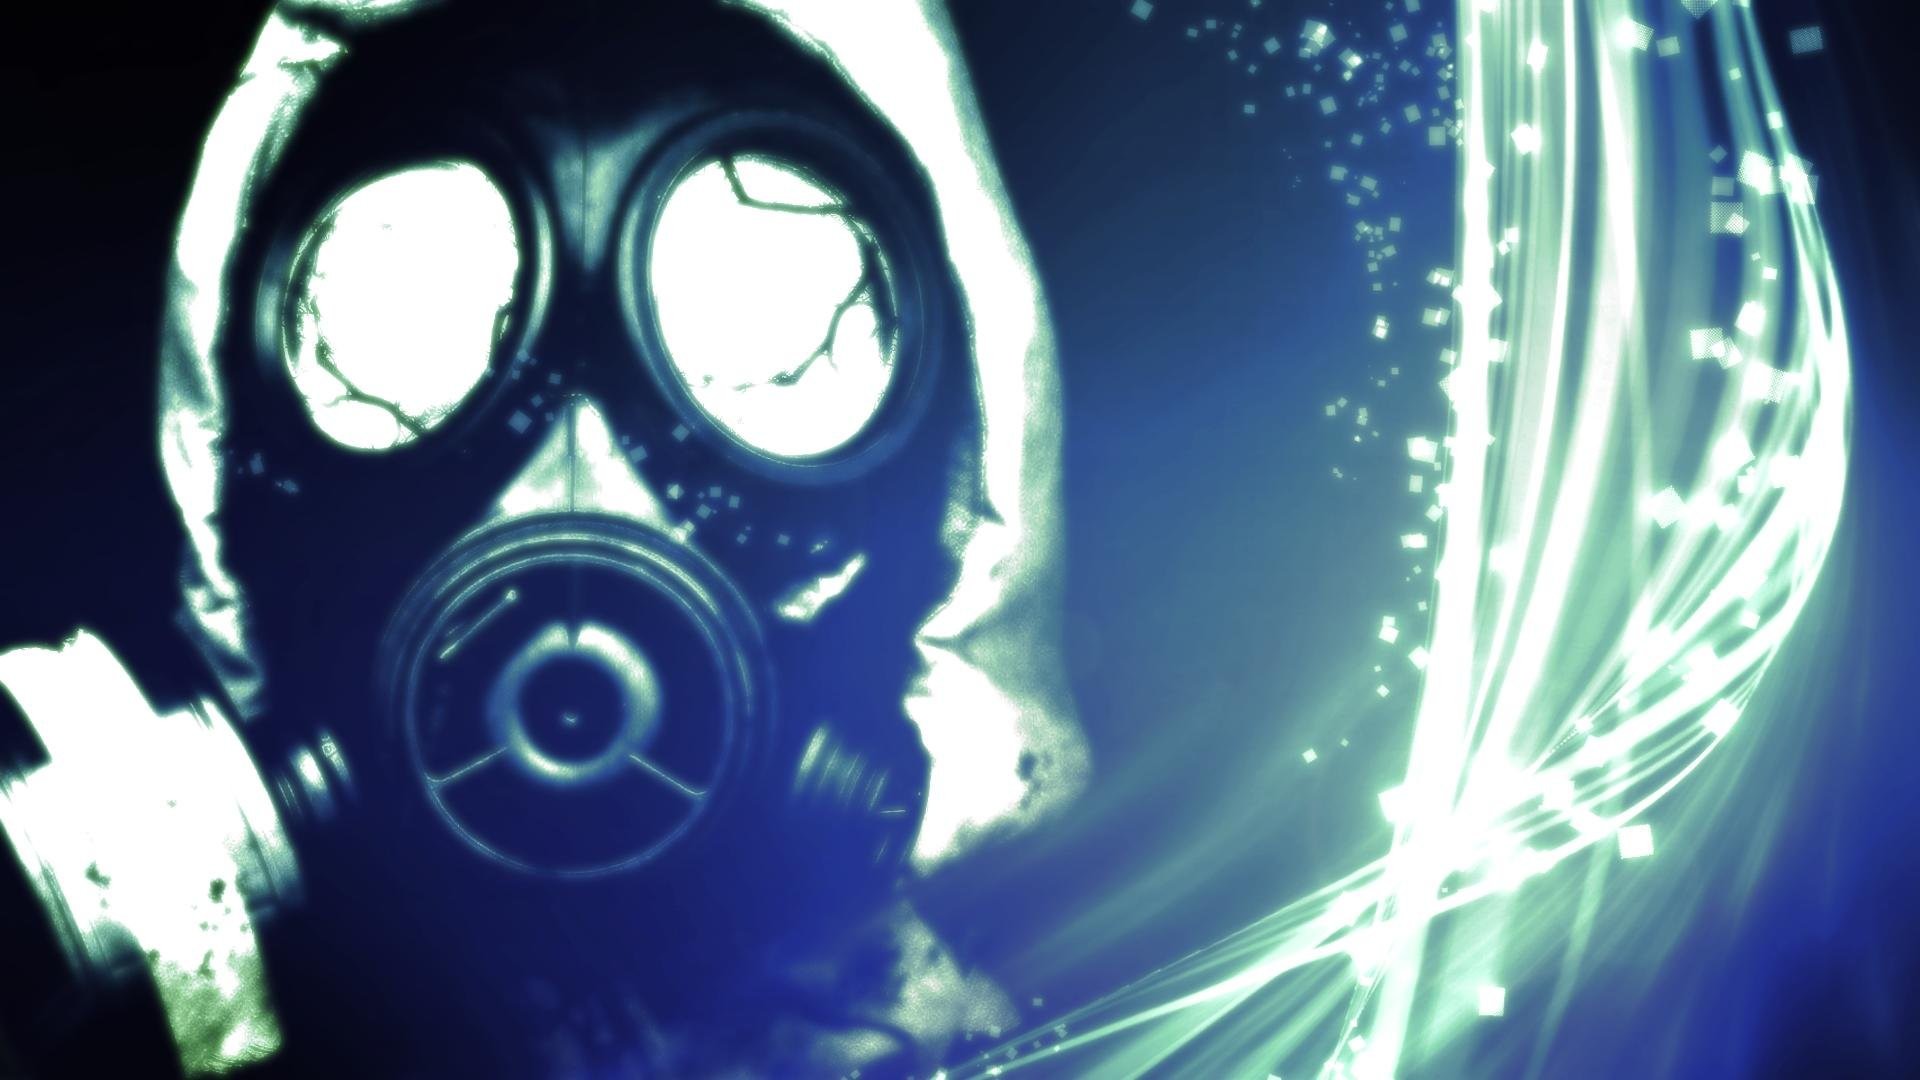 1920x1080 Wallpapers Dubstep The Crazies Gasmask 1600x1000 194846